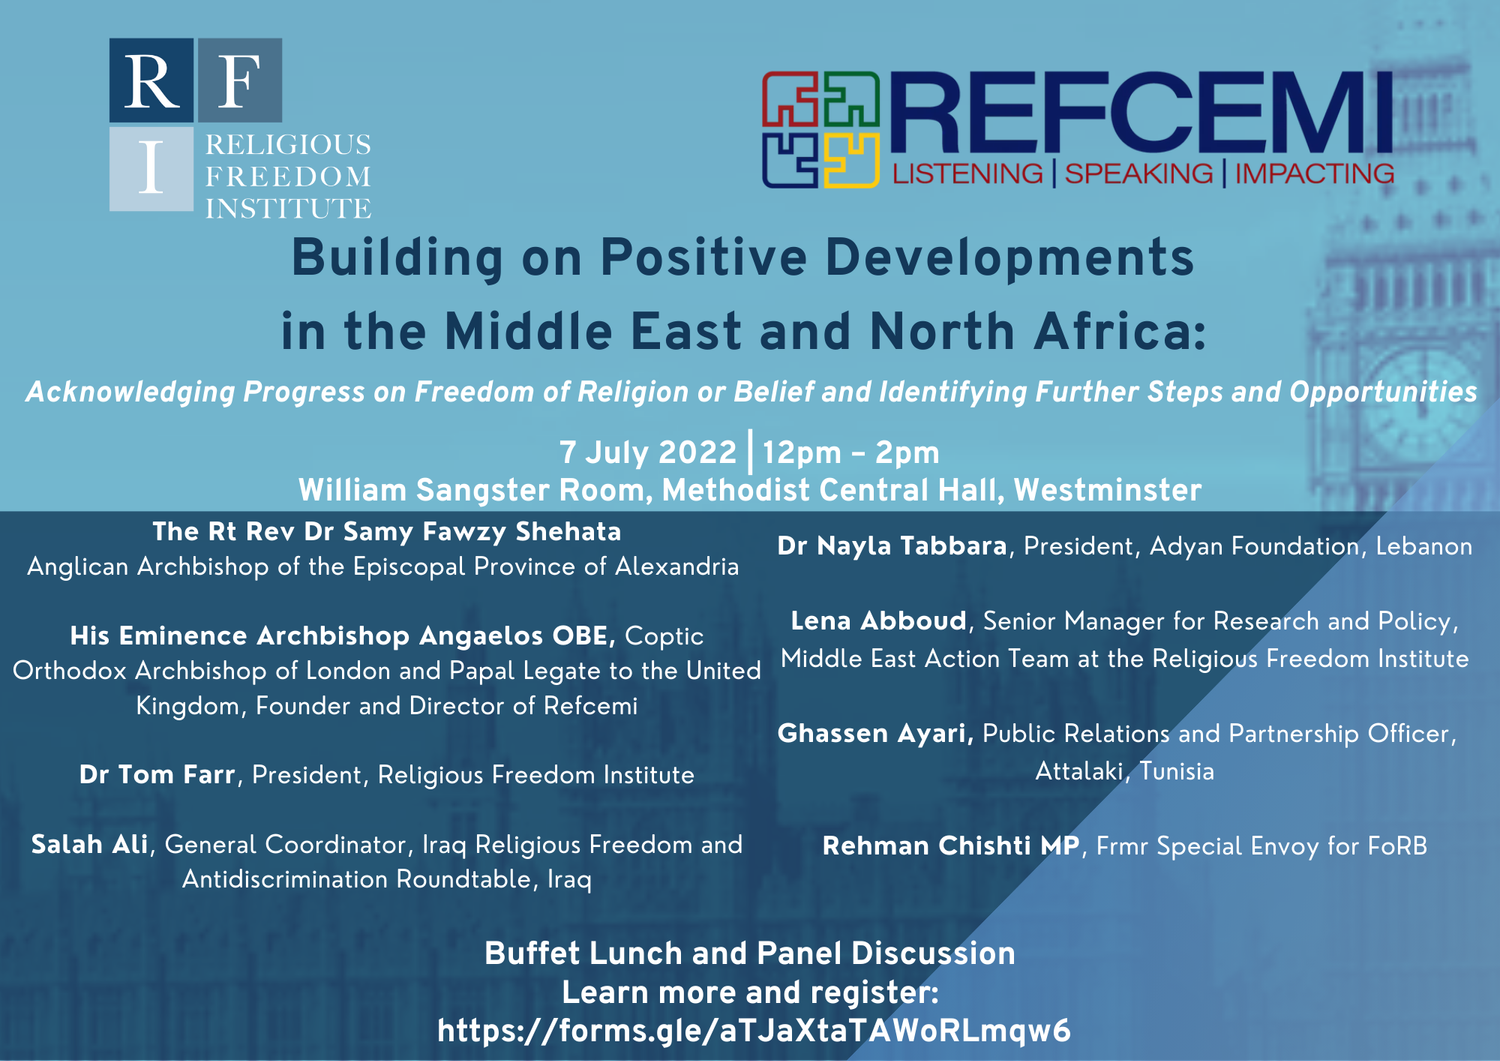 Featured image for “Building on Positive Developments in the Middle East and North Africa: Acknowledging Progress on Freedom of Religion or Belief and Identifying Further Steps and Opportunities”